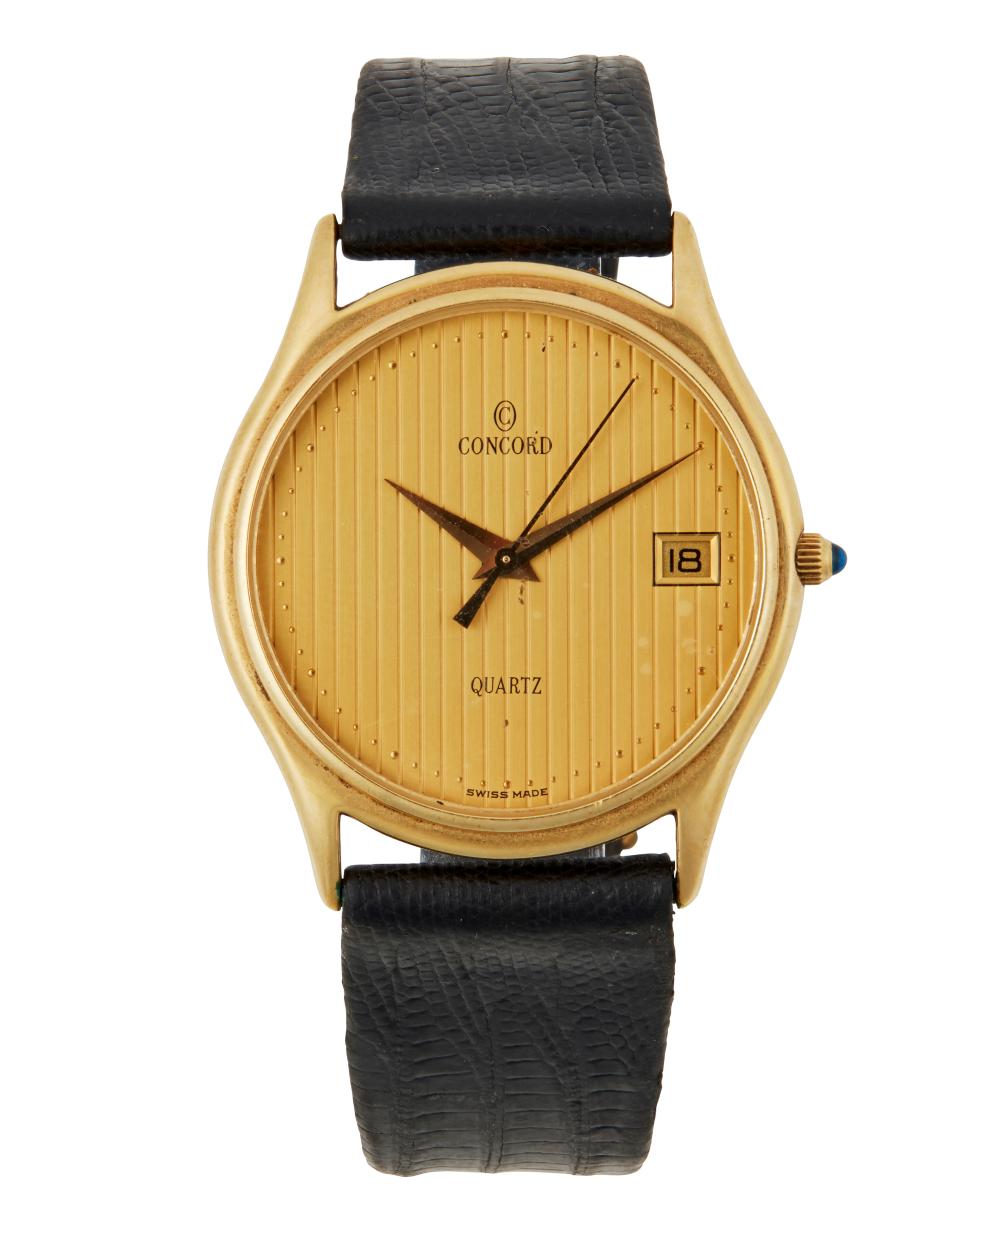 A CONCORD MARINER GOLD WRISTWATCHA 343579